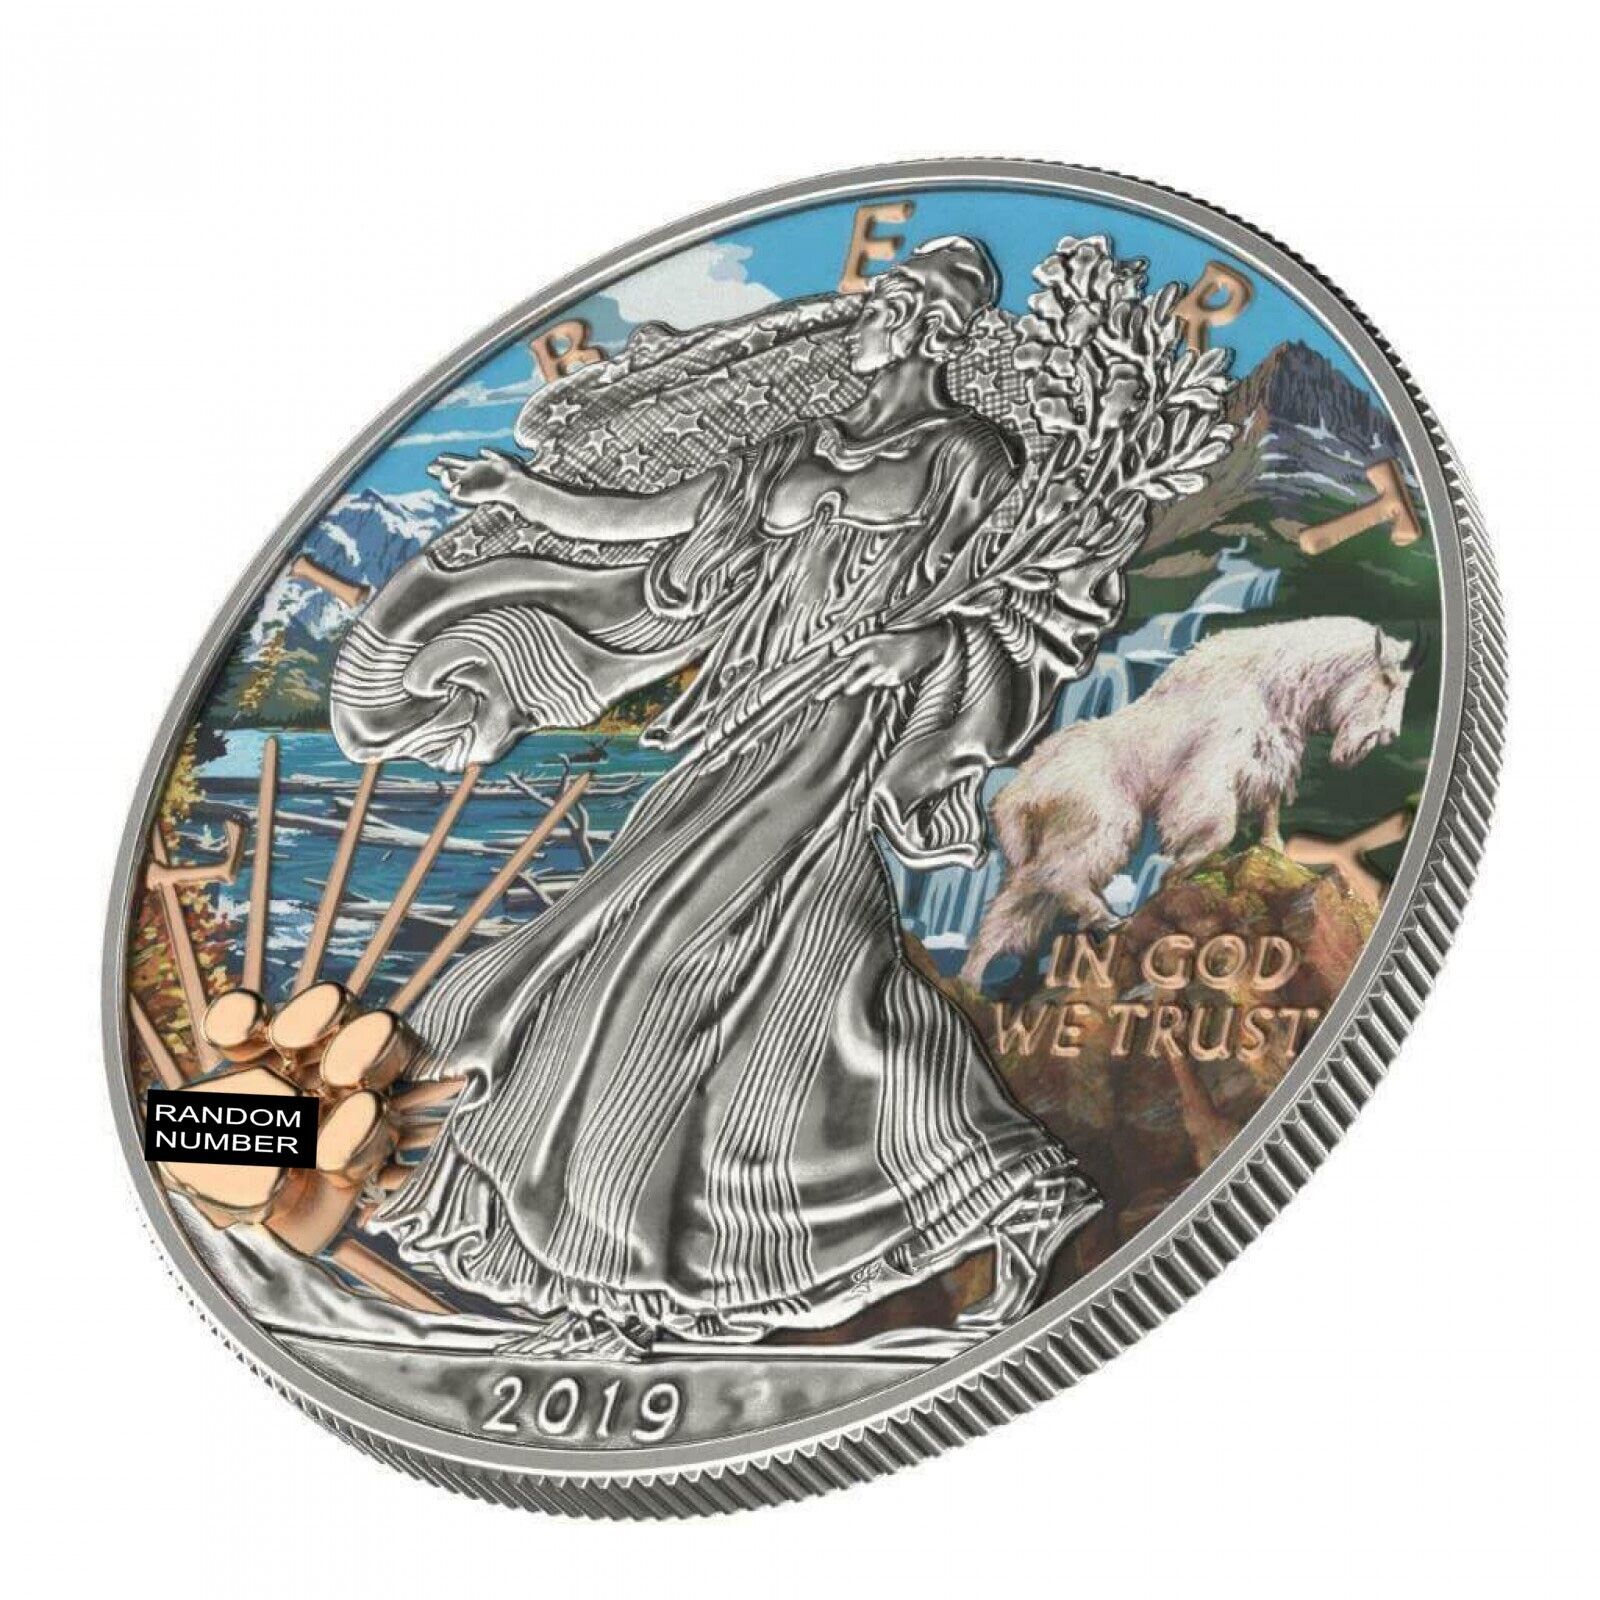 1 Oz Silver Coin 2019 $1 Liberty National Parks of The United States - Glacier-classypw.com-1